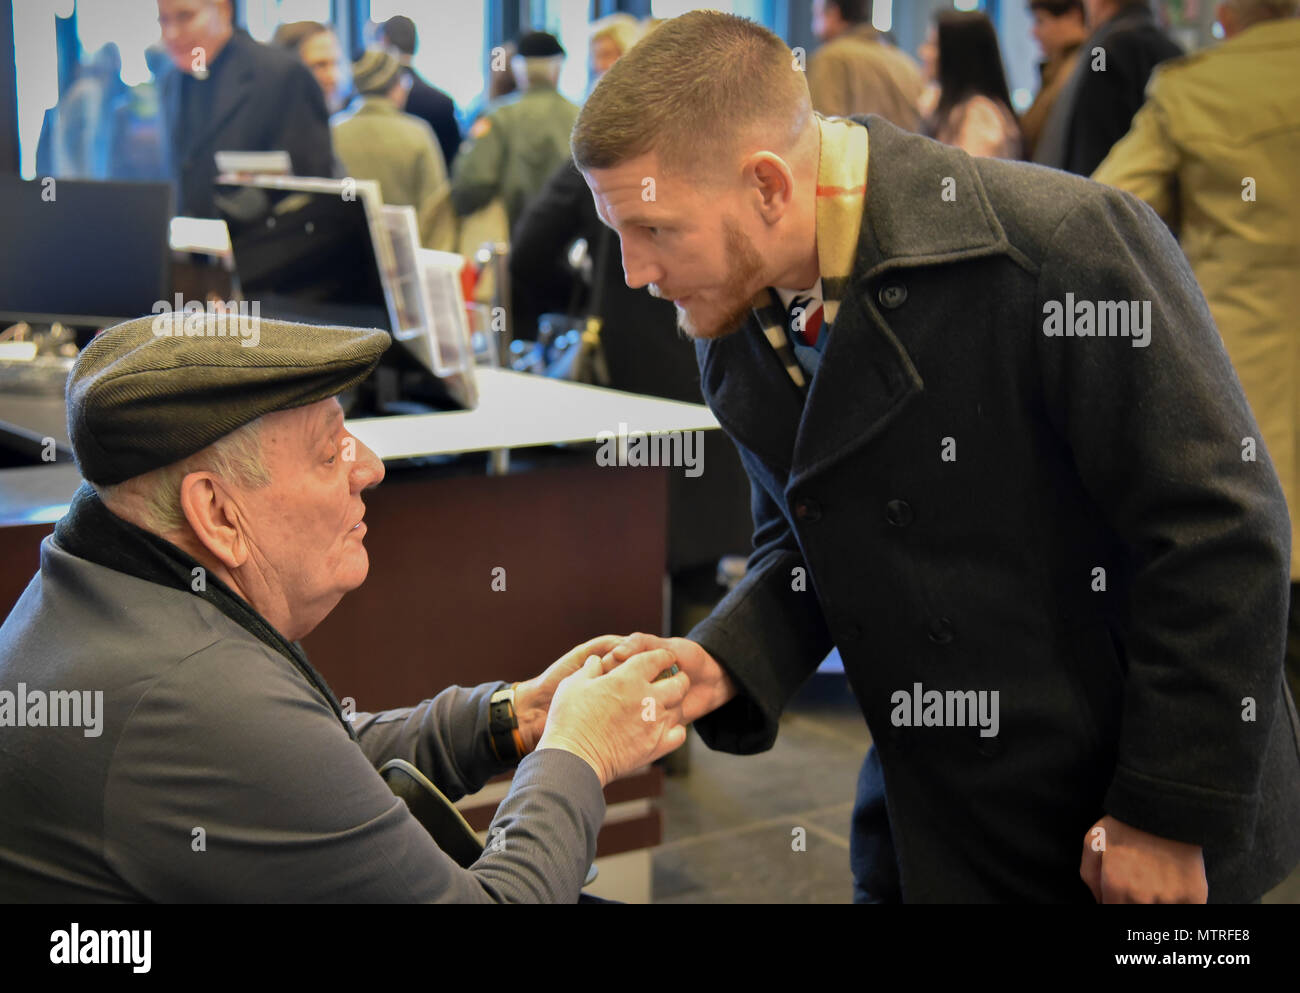 Former U.S. Army Spc. Kenneth Stumpf, Medal of Honor recipient and retired U.S. Marine Corps Cpl. William Kyle Carpenter, Medal of Honor recipient, exchange coins during a traditional Inaugural Day Medal of Honor breakfast held at the Reserve Officers Association headquarters in Washington D.C., January 20, 2017. (U.S. Army Reserve photo by Master Sgt. Marisol Walker/Released) Stock Photo